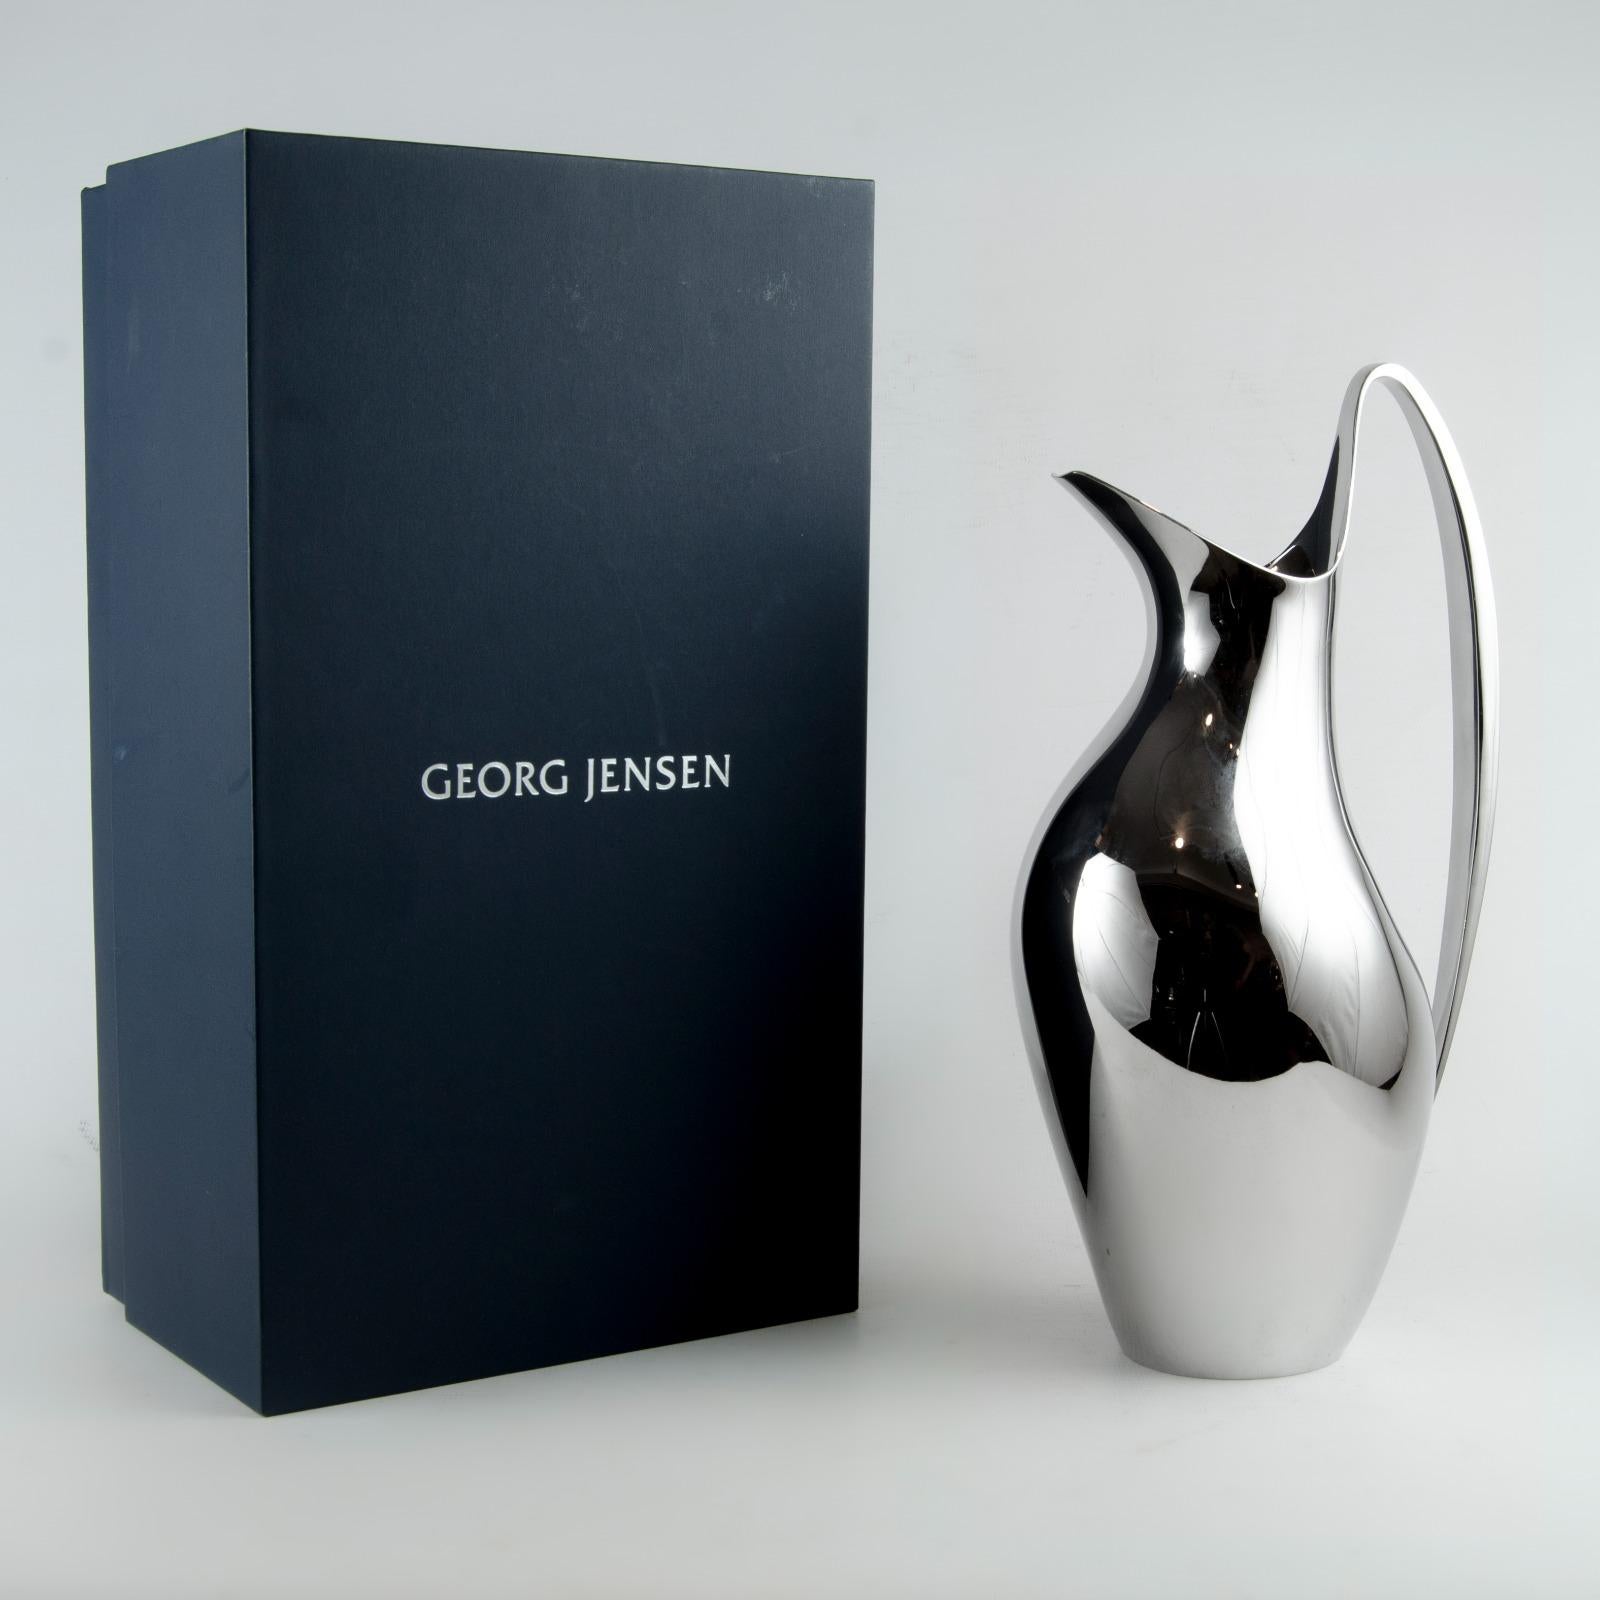 Launched in 2008 to coincide with master designer Henning Koppel's 90th birthday, Masterpieces revisits Georg Jensen's original silver hollowware. Of all the designers to work with Georg Jensen through the years, Henning Koppel was among the most